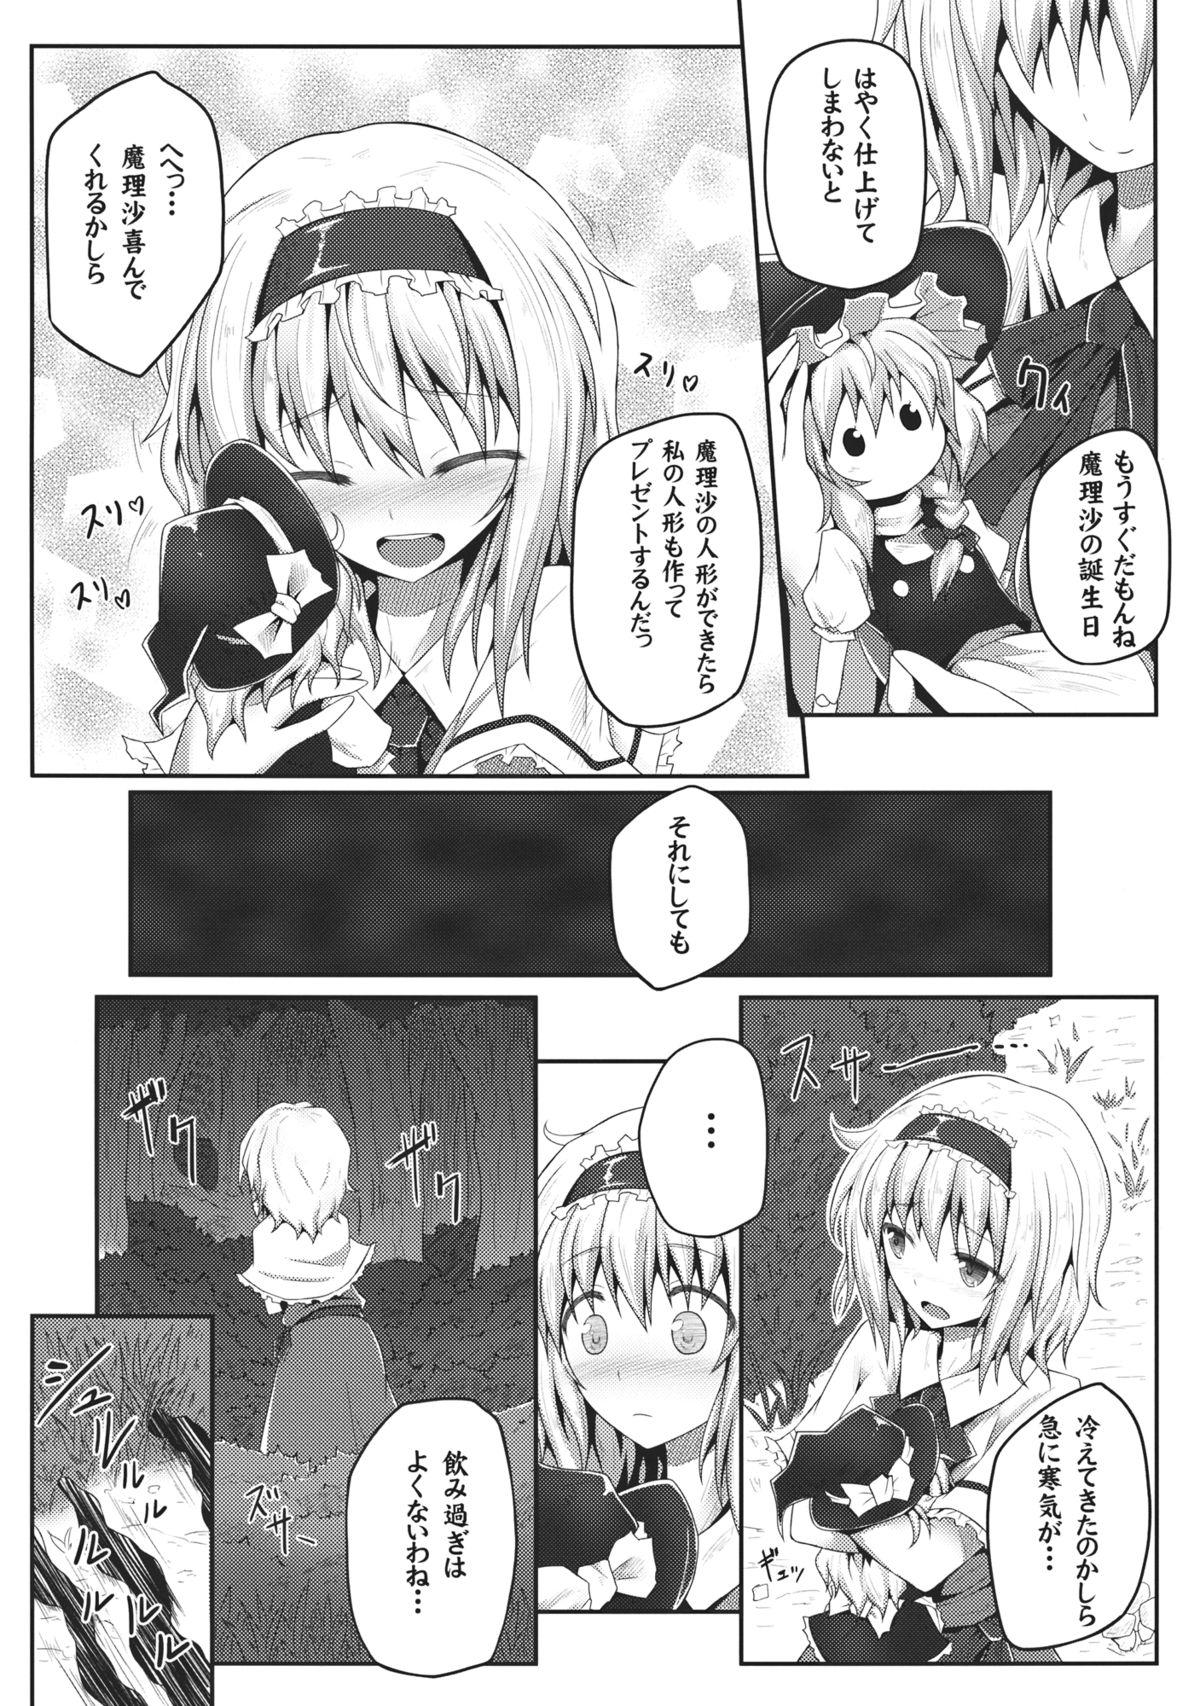 Stepdaughter Nozomiusu - Touhou project Francaise - Page 5